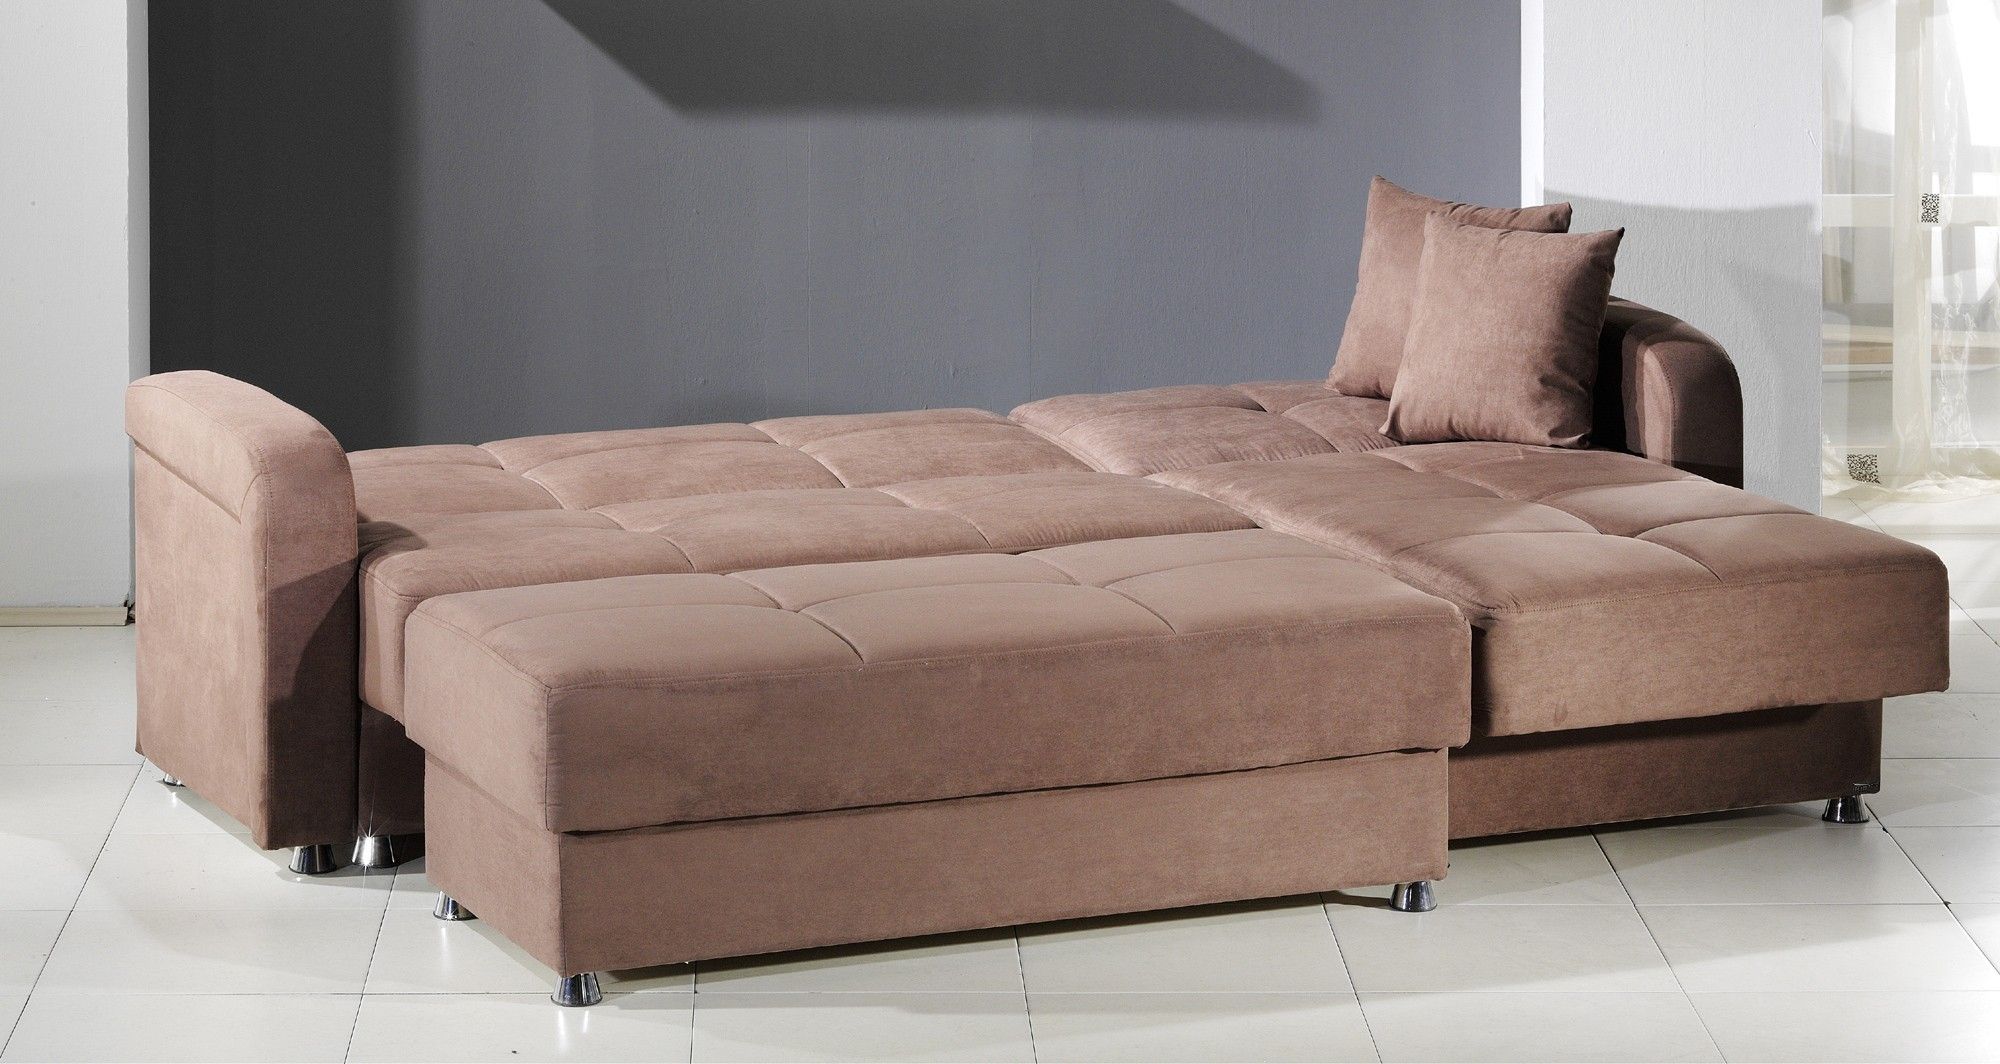 Charming Sectional Sofas Ct 42 For Your Eco Friendly Sectional For Eco Friendly Sectional Sofa (View 12 of 12)